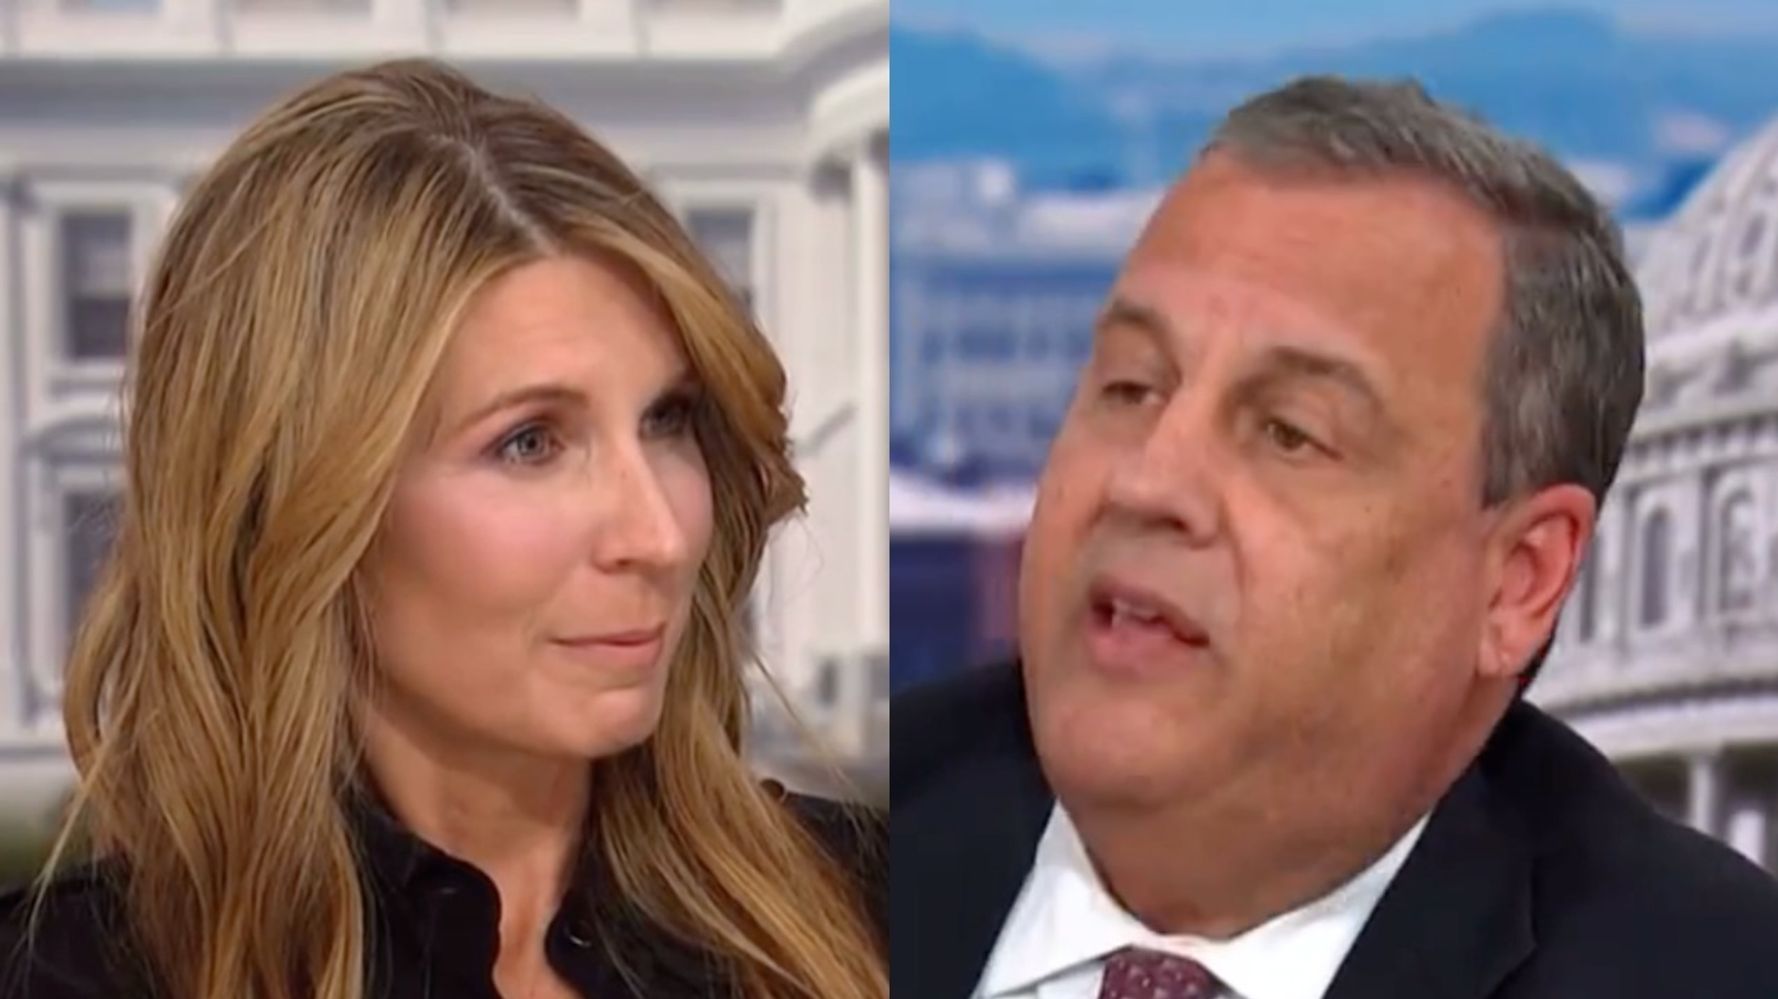 Nicolle Wallace Puts Chris Christie Through The Wringer Over Major Gap In His Book